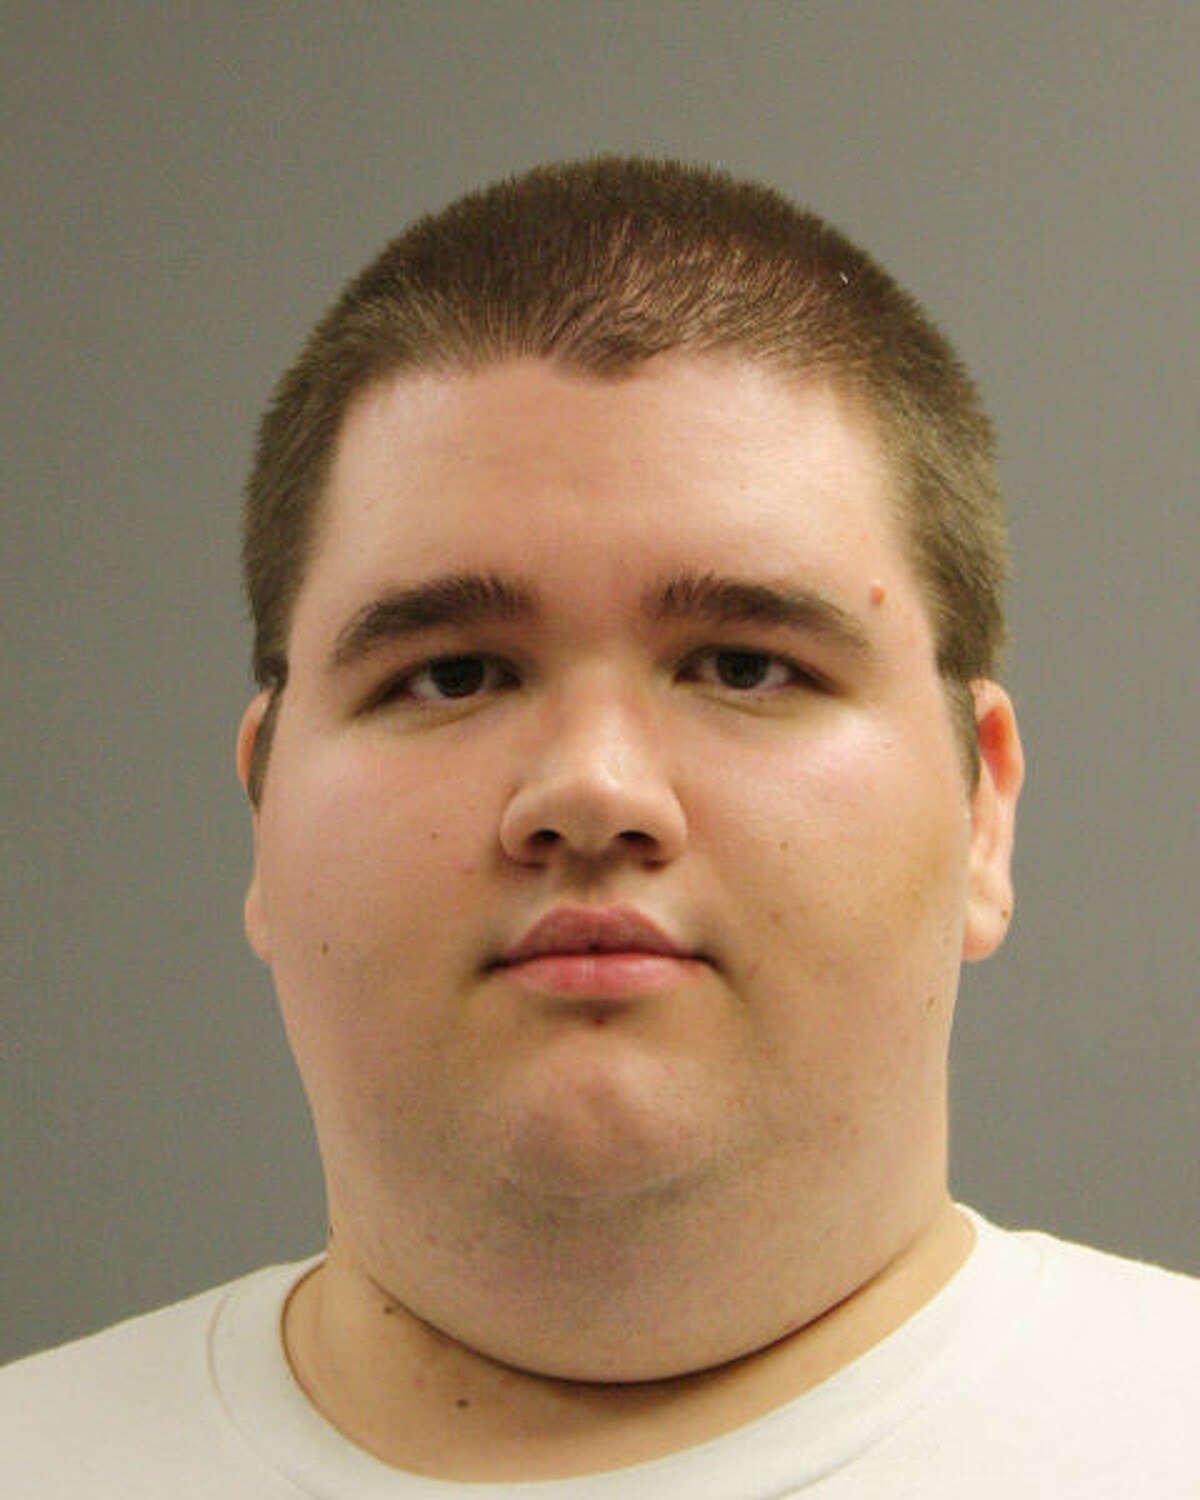 Patrick Joseph Hudson, 19, of Katy, has been charged with making a terroristic threat for posting a plan online to kill several young children during a school shooting. (HCSO)